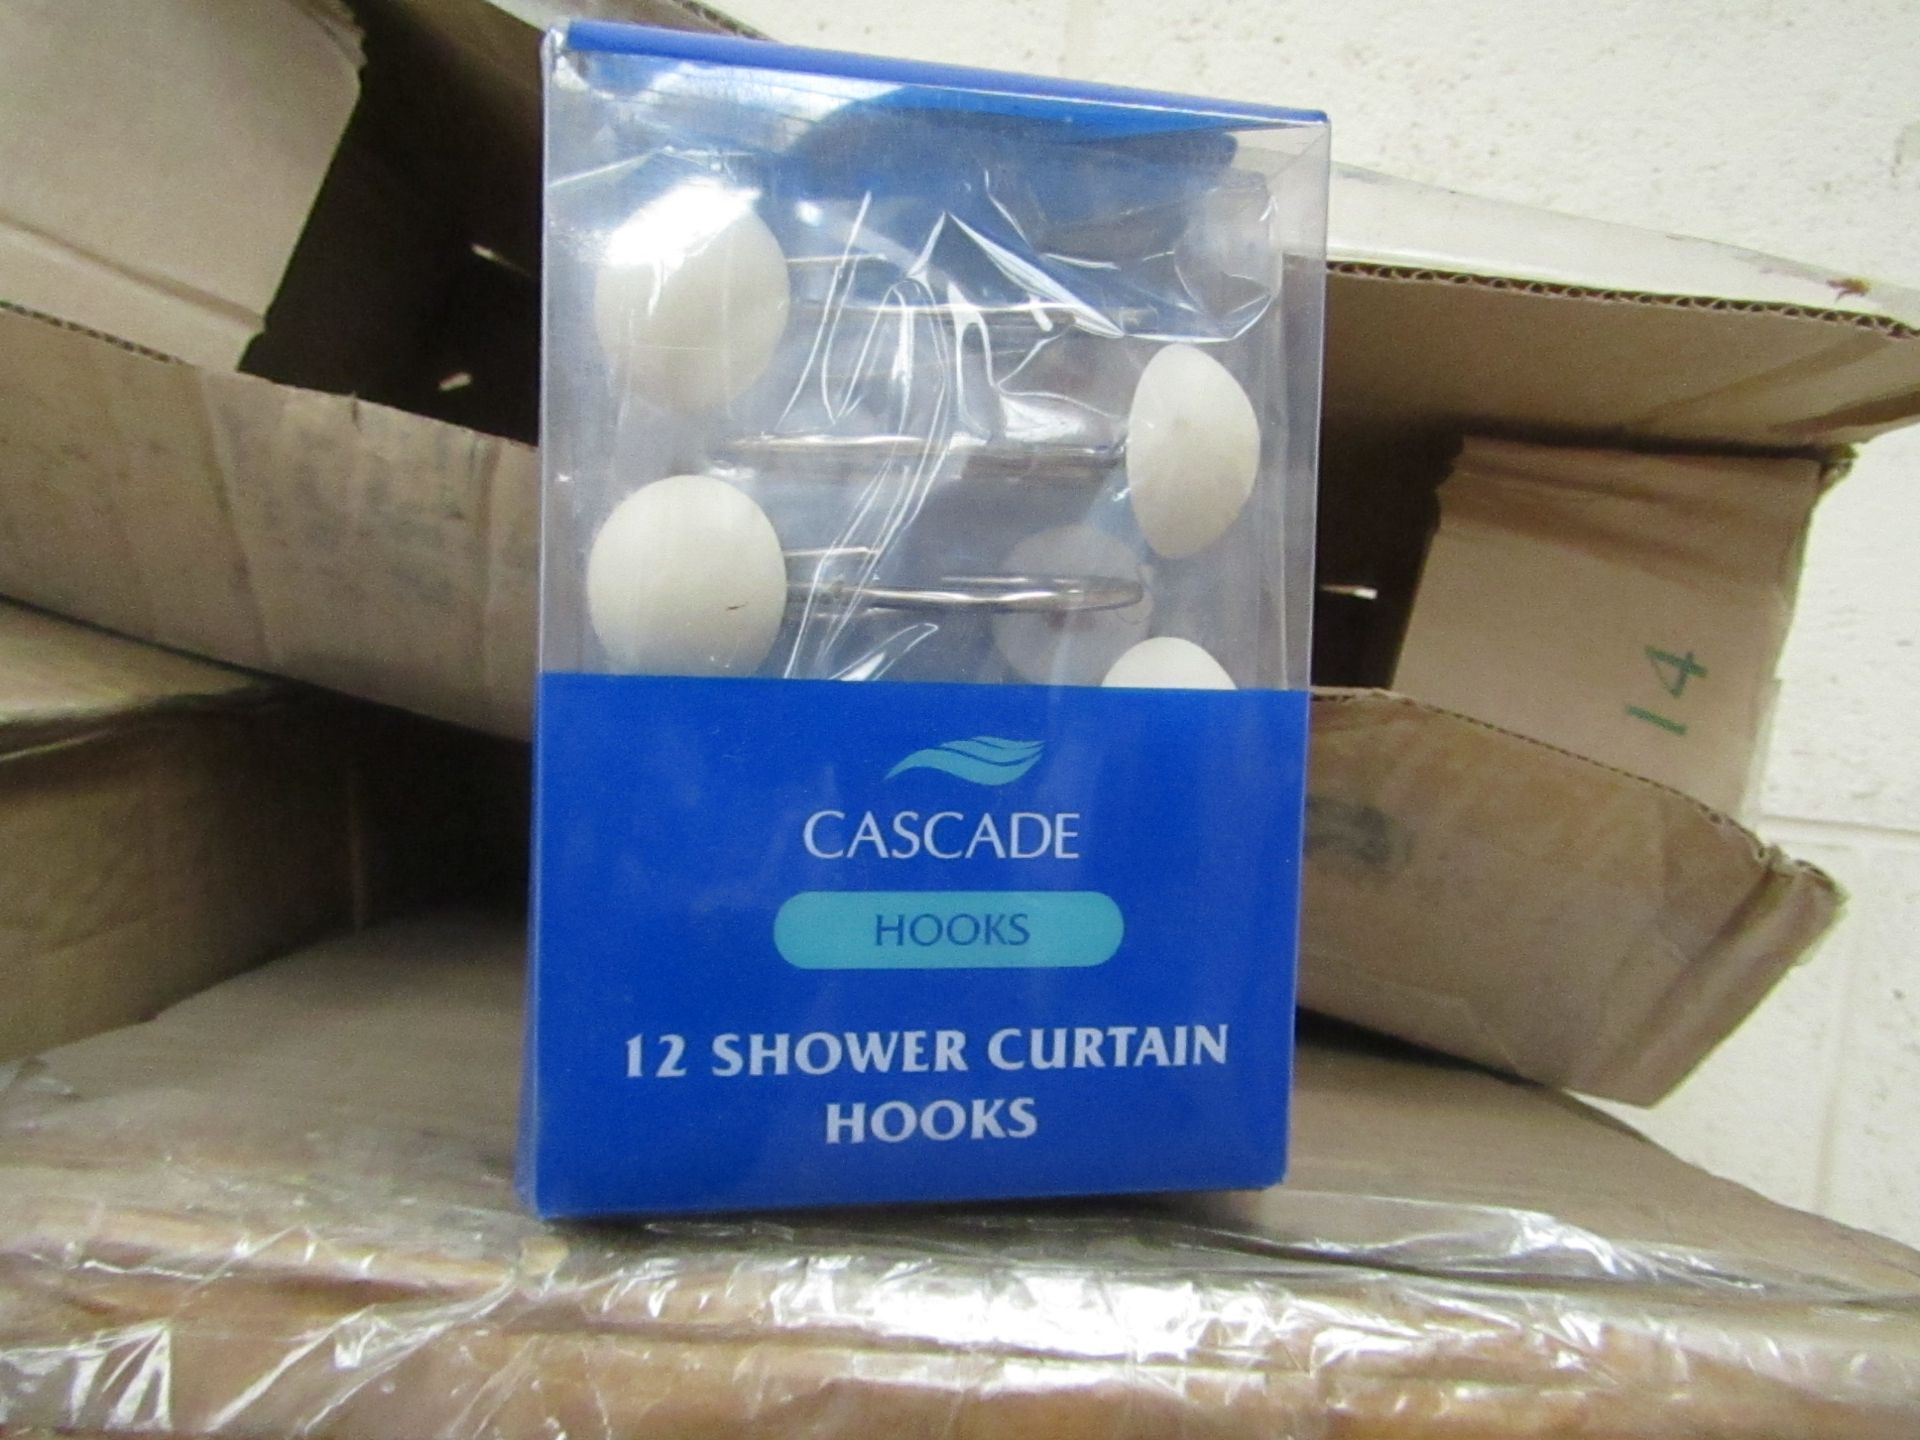 box of approx 72 packs of Cascade shower cutain hooks, colour may vary from the picture